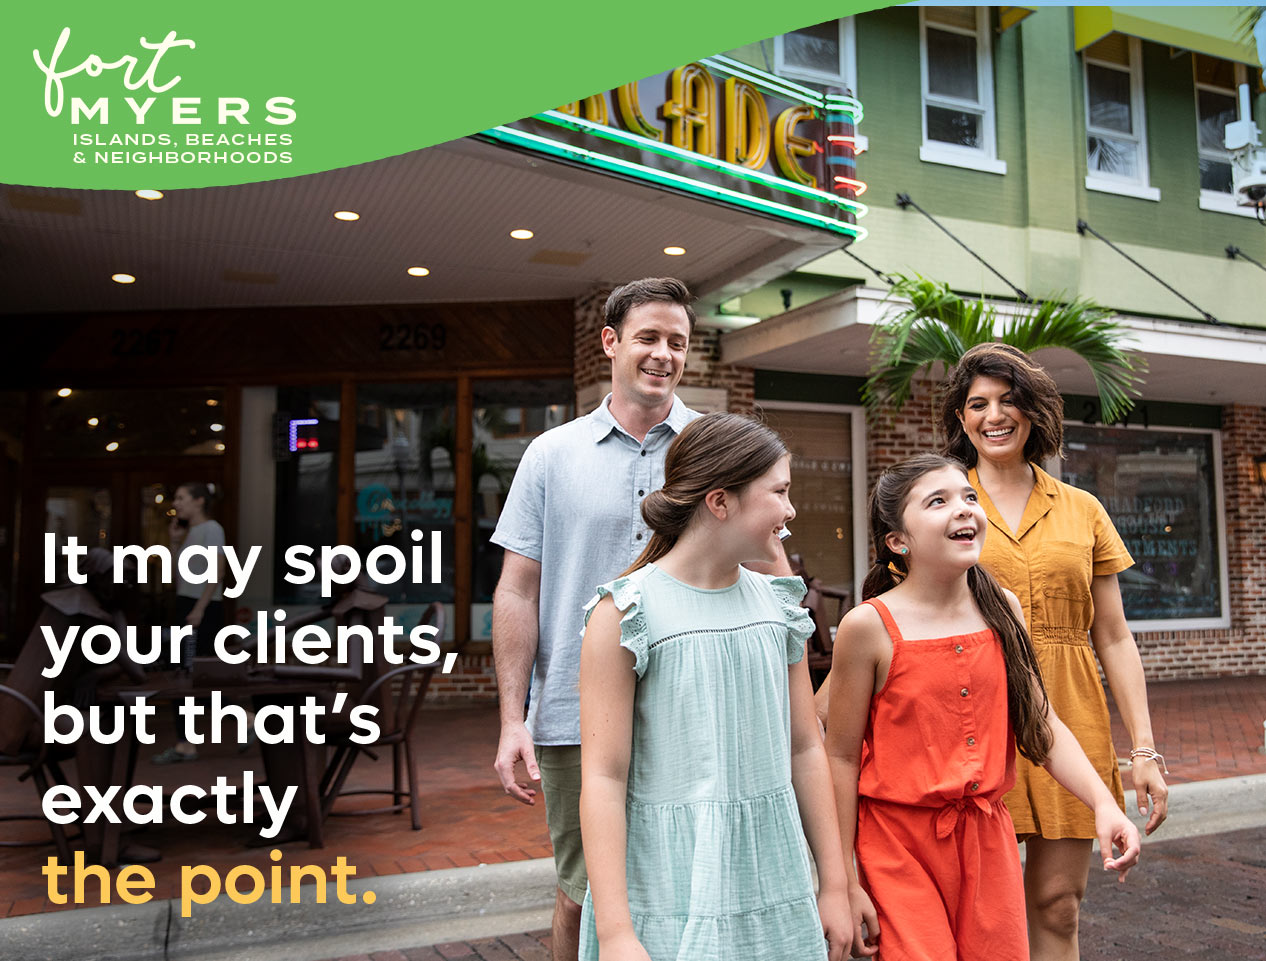 Fort Myers Islands, Beaches & Neighborhoods - It may spoil your clients, but that's exactly the point.